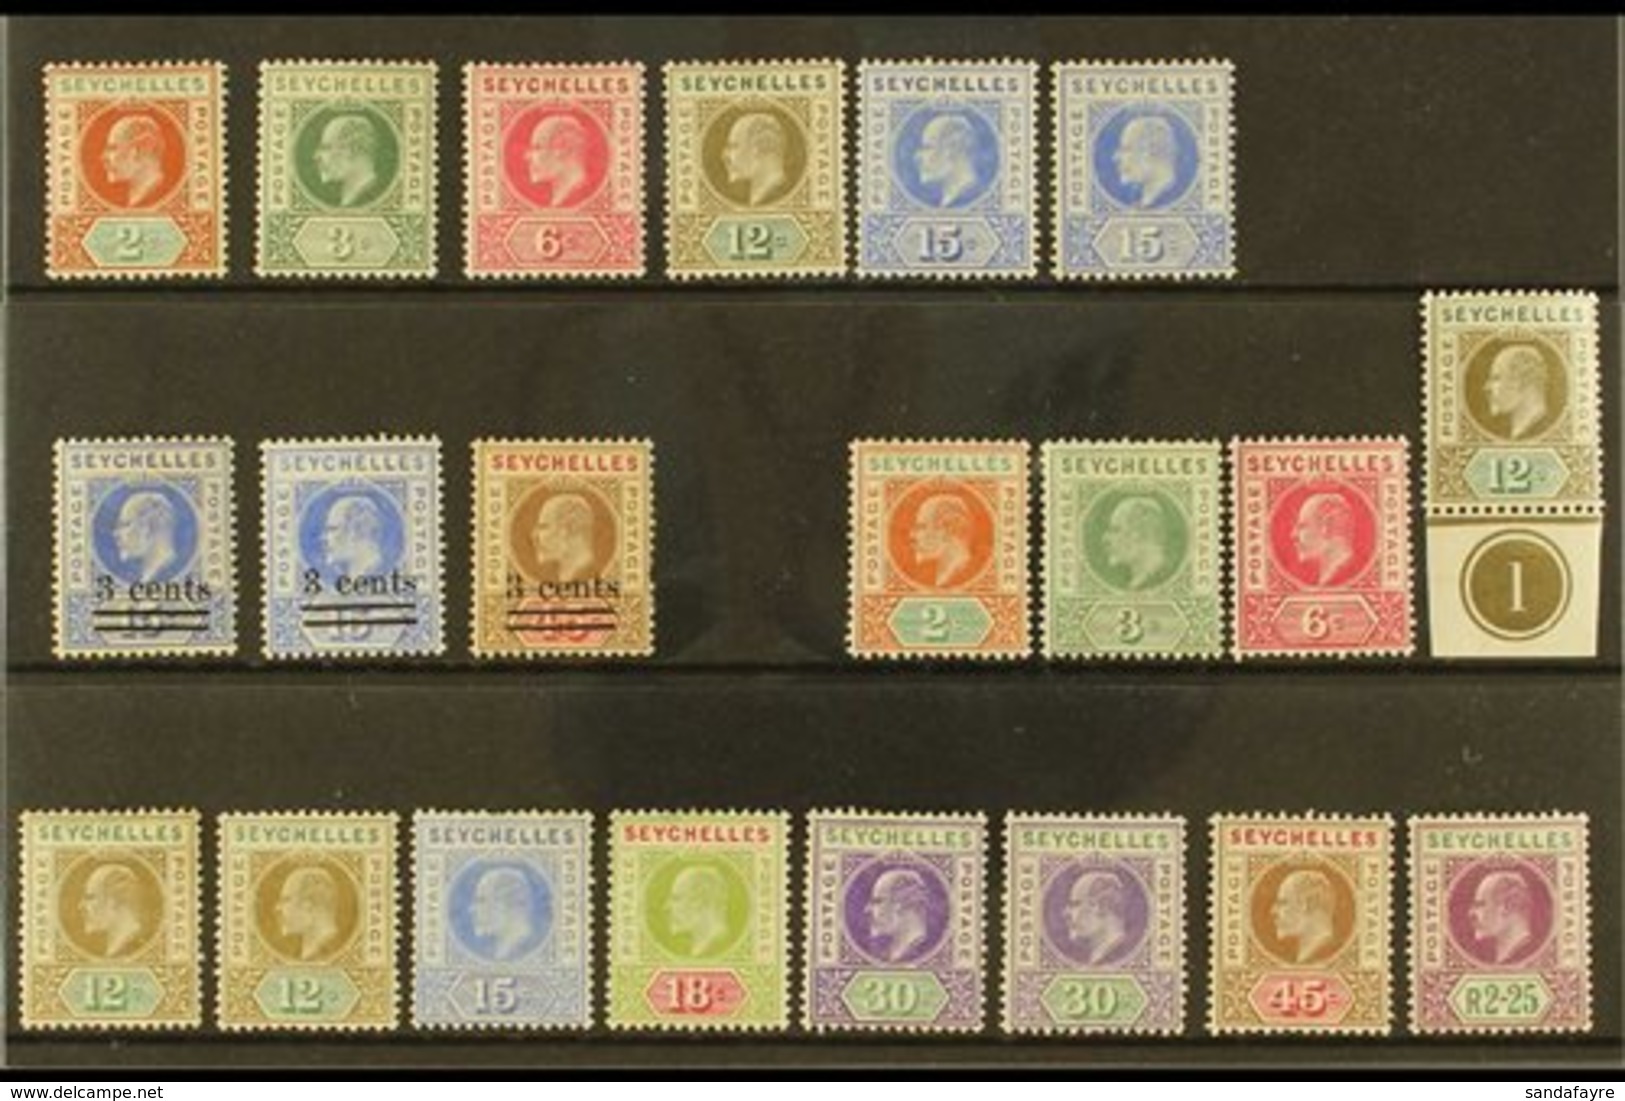 1903-06 MINT SELECTION  Presented On A Stock Card & Includes A 12c Control Single & Values To 2r25. Generally Good To Fi - Seychelles (...-1976)